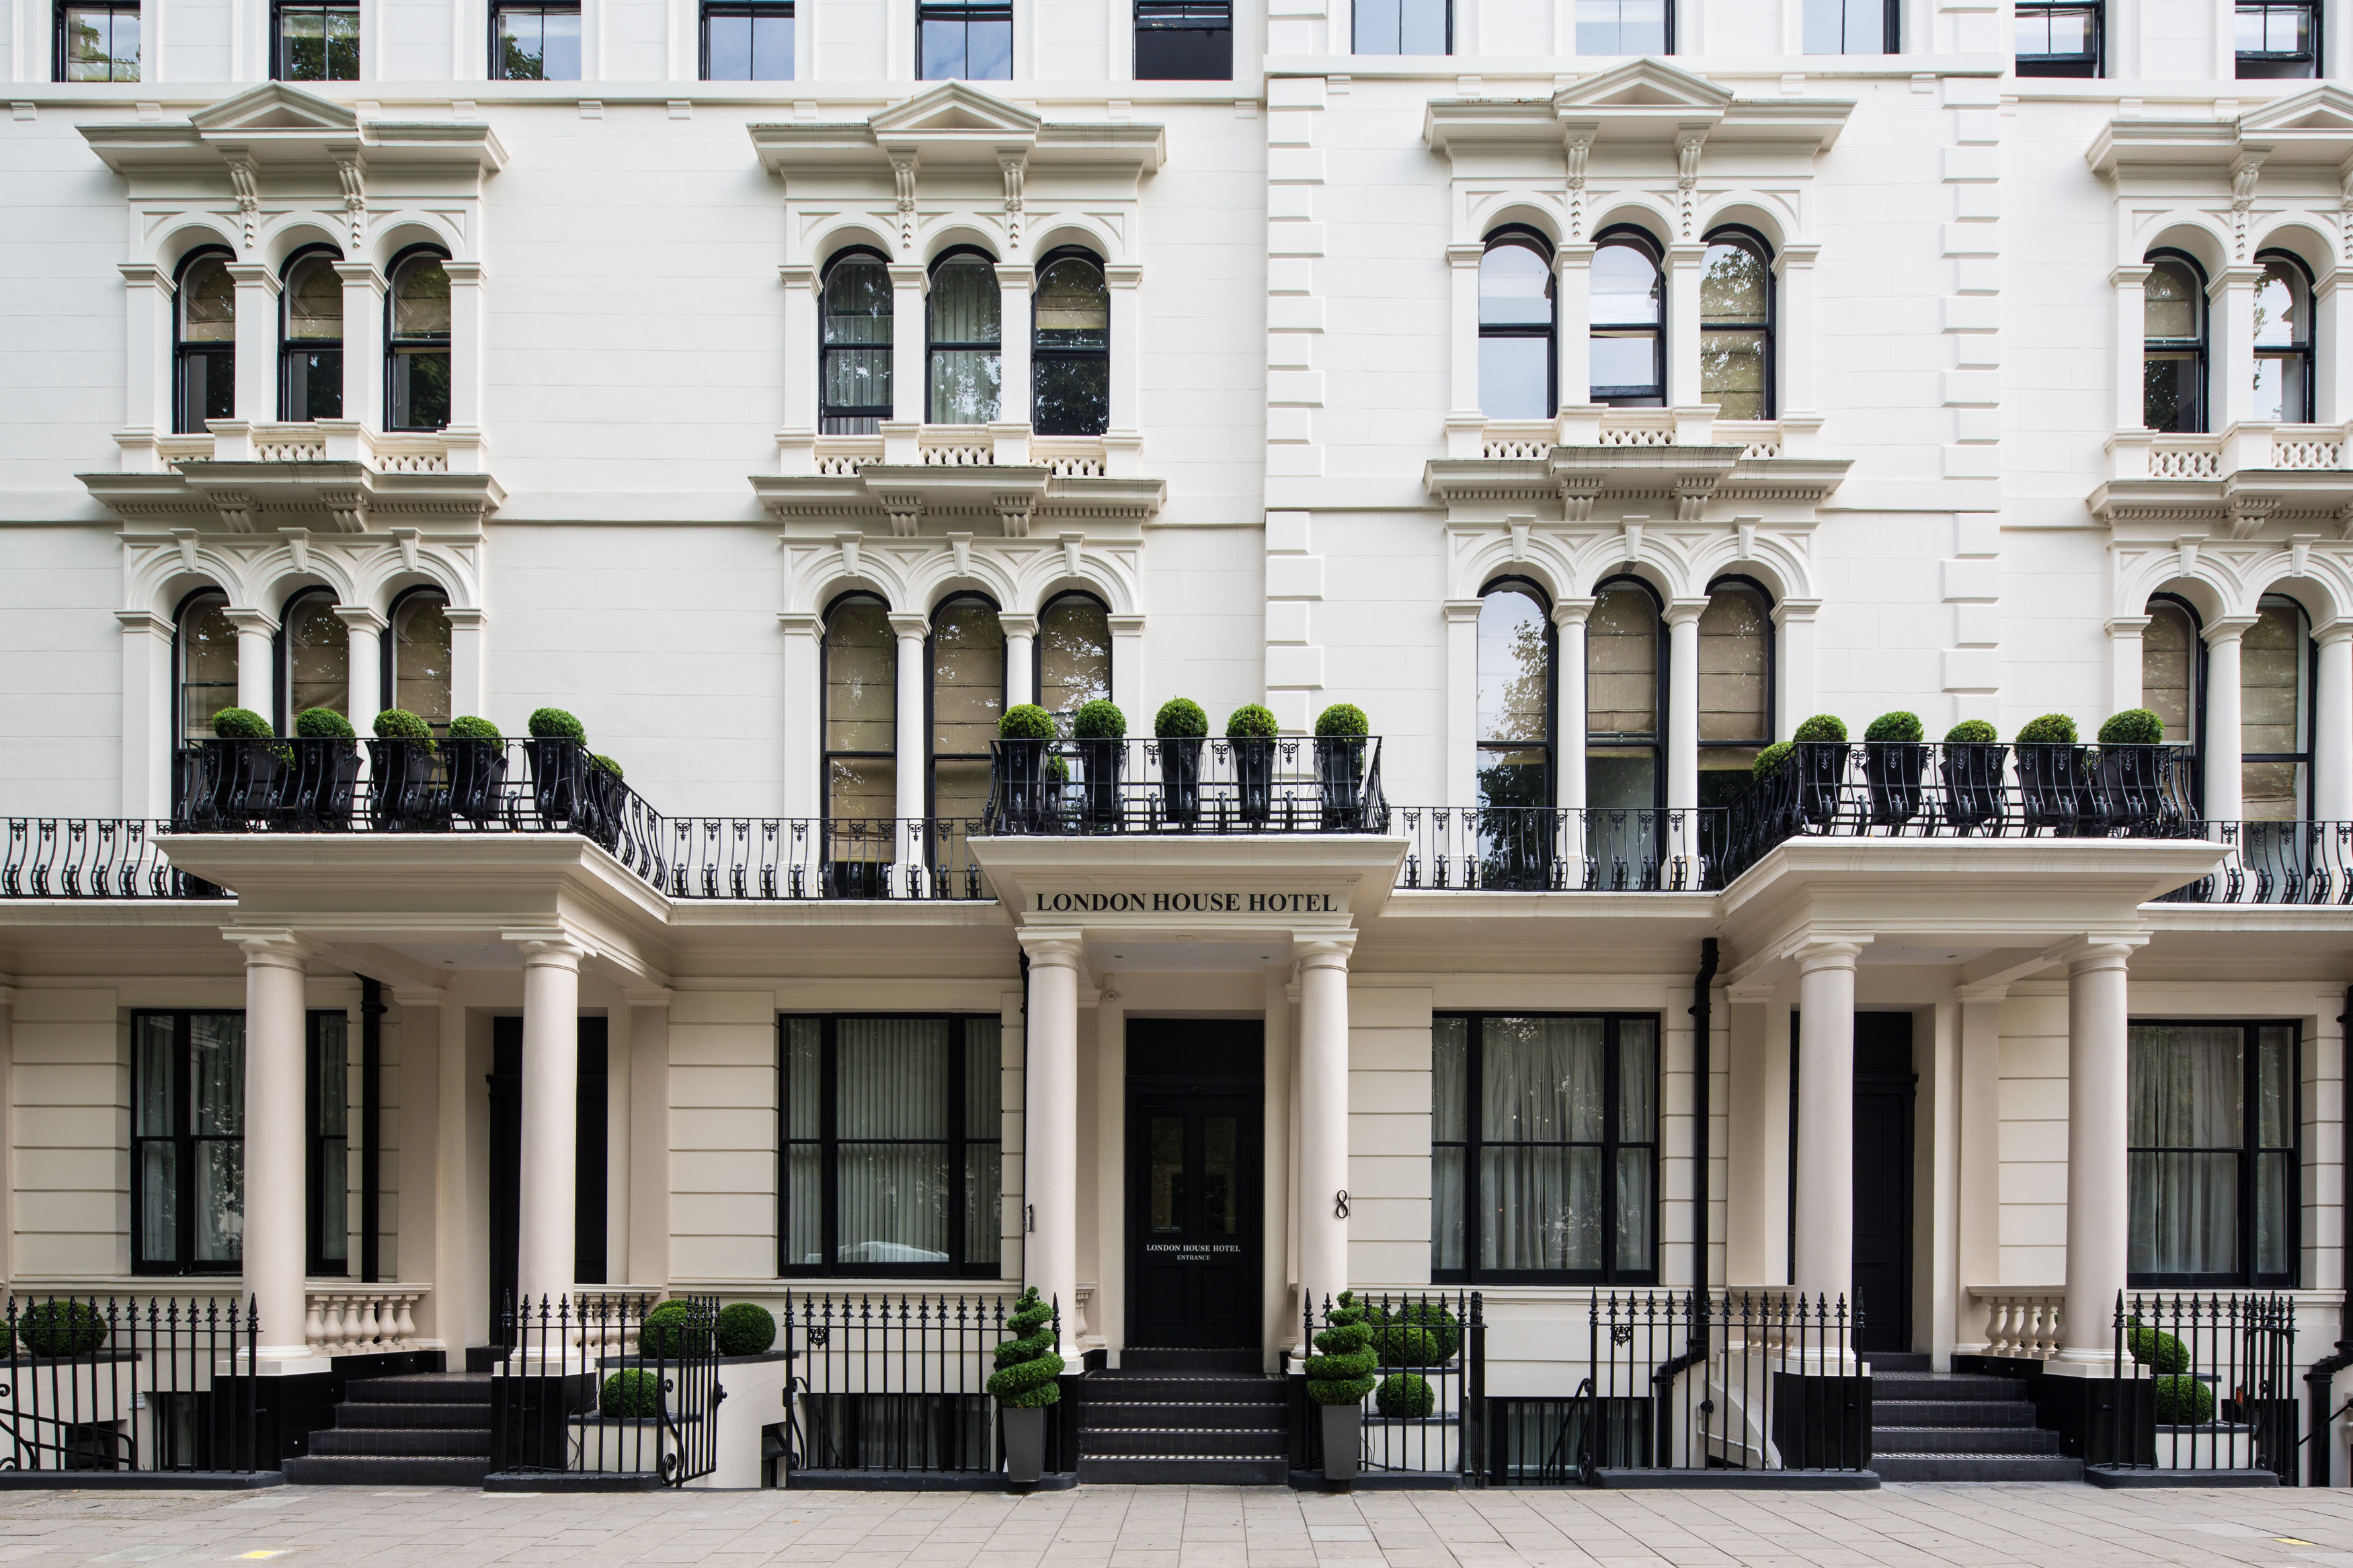 30+ Best Vorrat Bayswater Inn Hotel London - Bayswater Inn London Hotel 3 Holiday In United Kingdom : The bayswater inn hotel is one of the oldest victorian buildings in bayswater, it was built in the 1900's and overlooks the picturesque views of princes gardens.